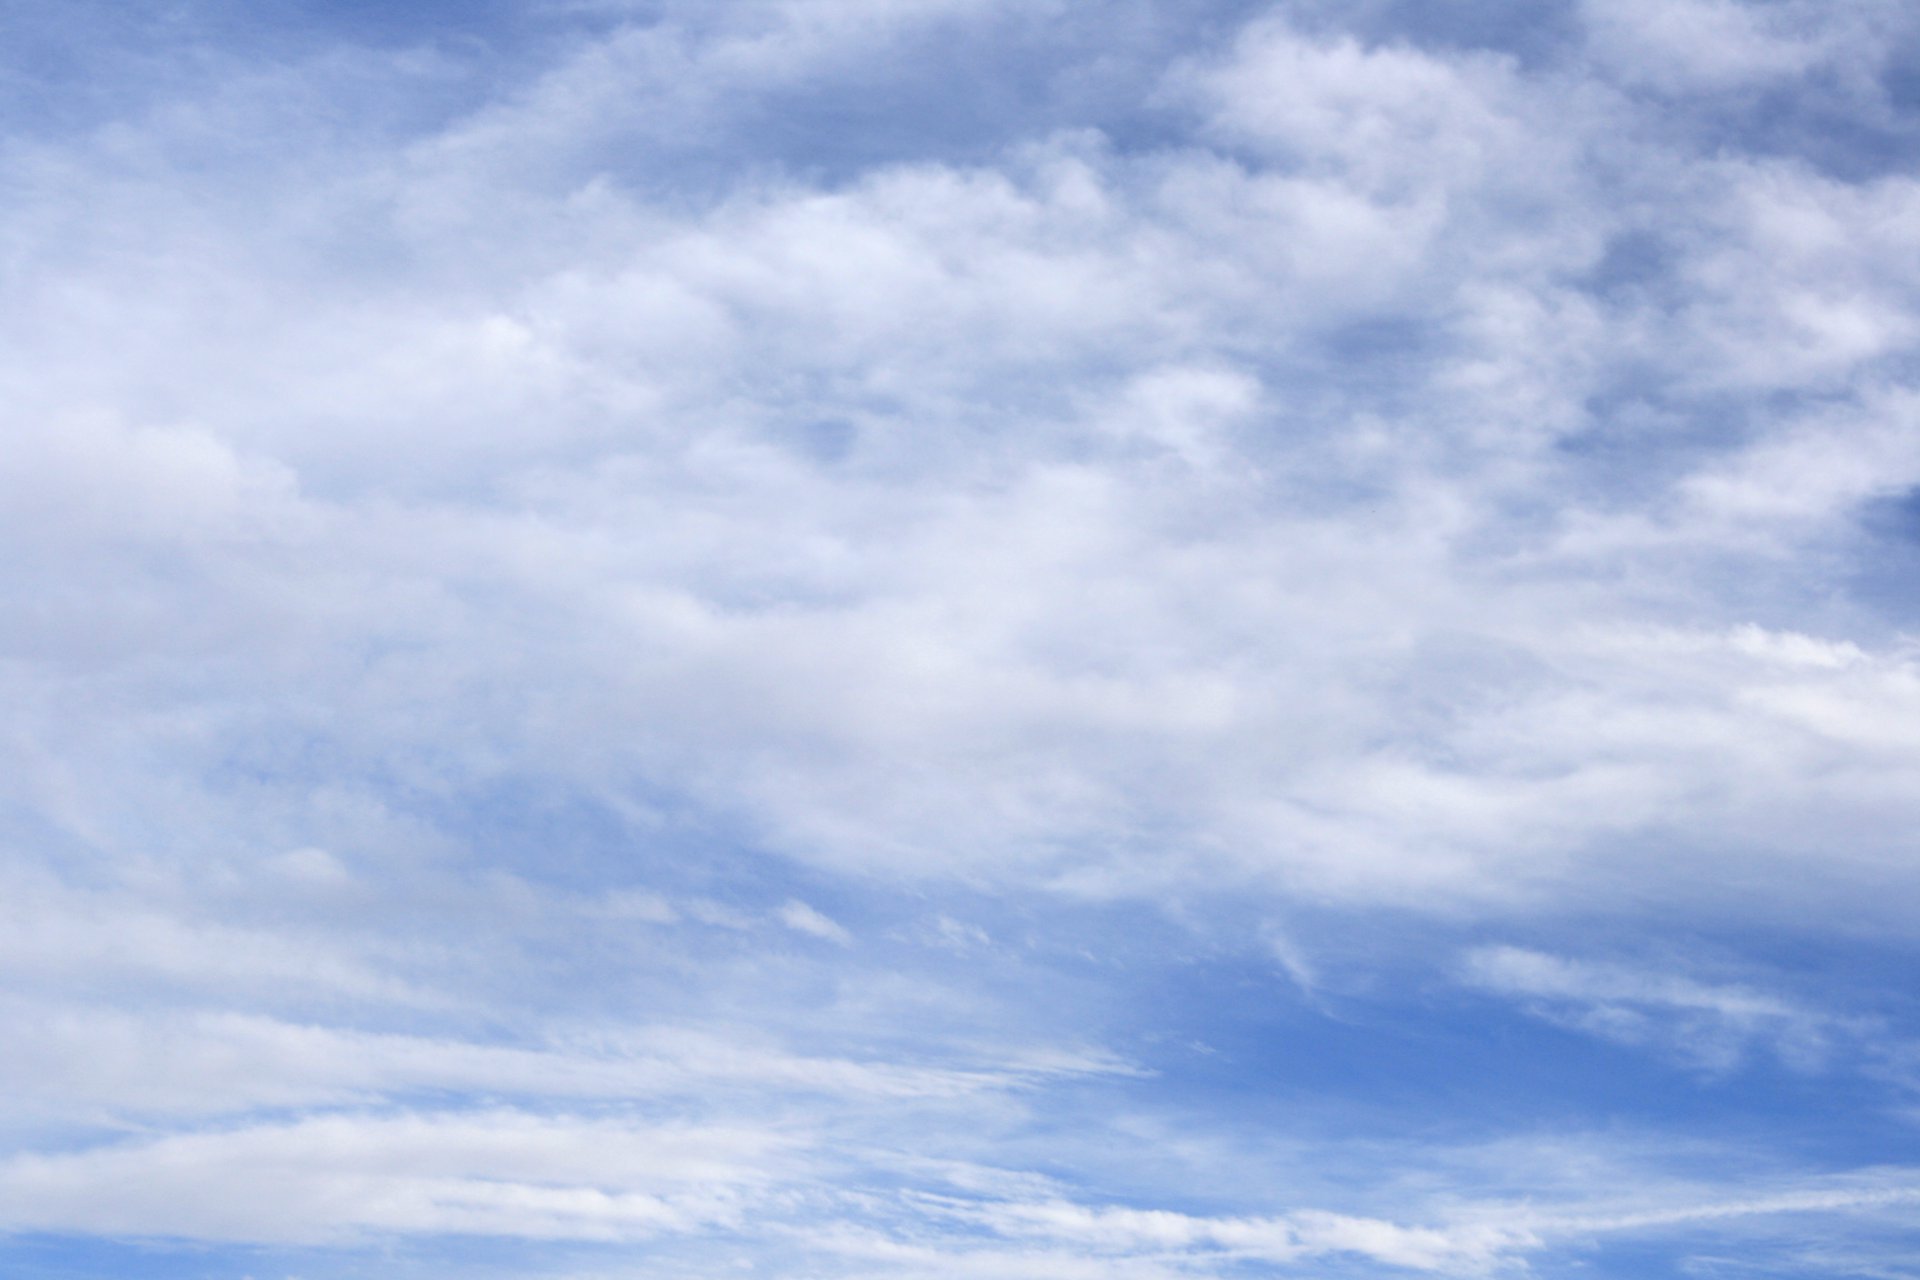 Blue Sky With Clouds Images - Free Images | Bodyshwasume Wallpaper